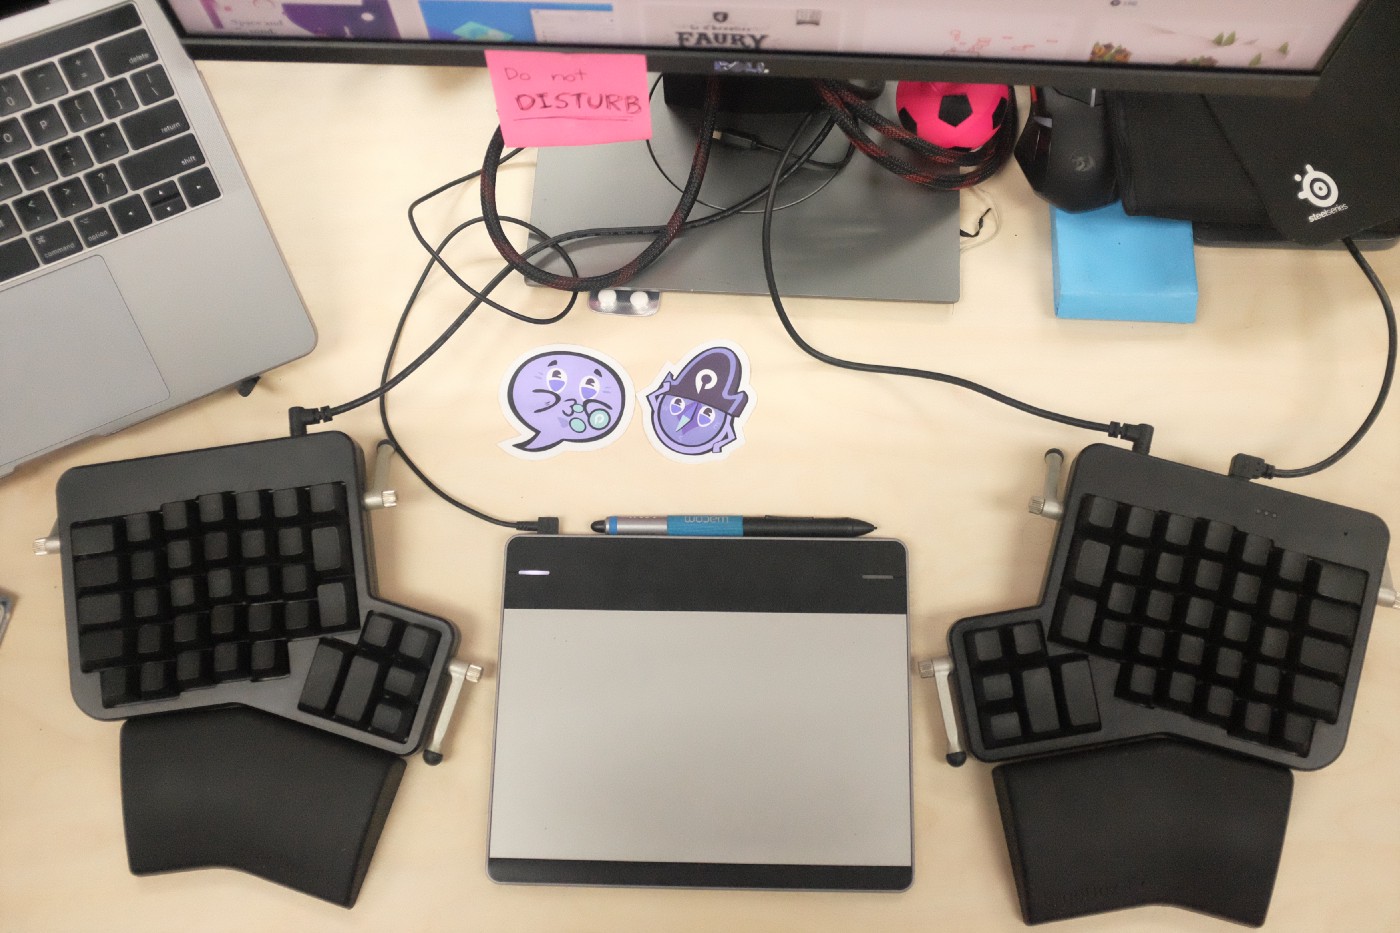 A photo of my keyboard and graphic tablet